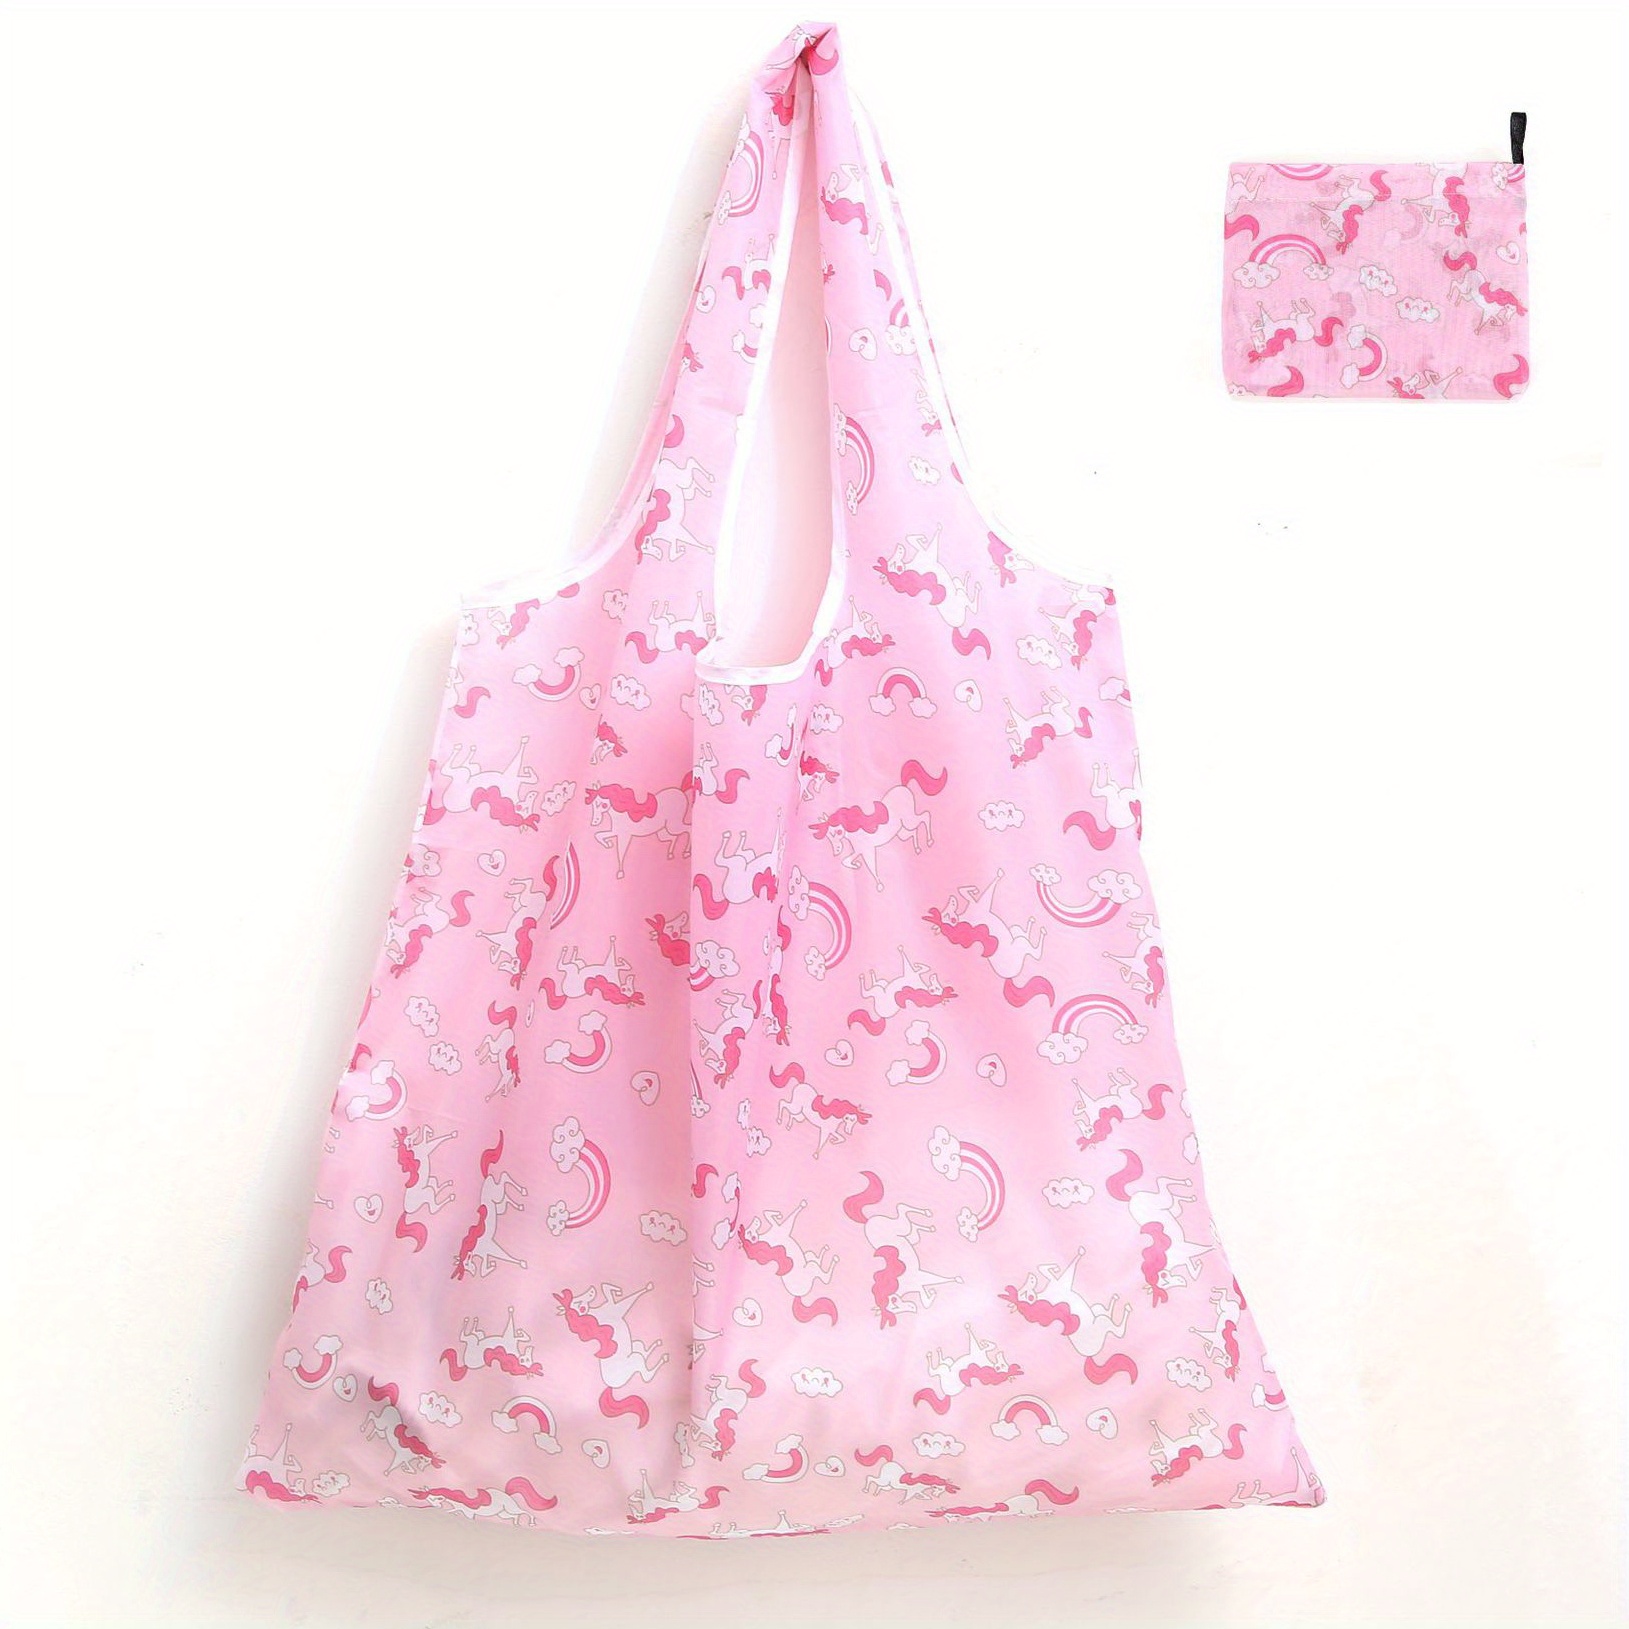 Reusable Shopping Basket Cherry Blossom Pink Portable Folding Picnic  Grocery Bags Laundry Basket Shopping Tote Bag : Home & Kitchen 